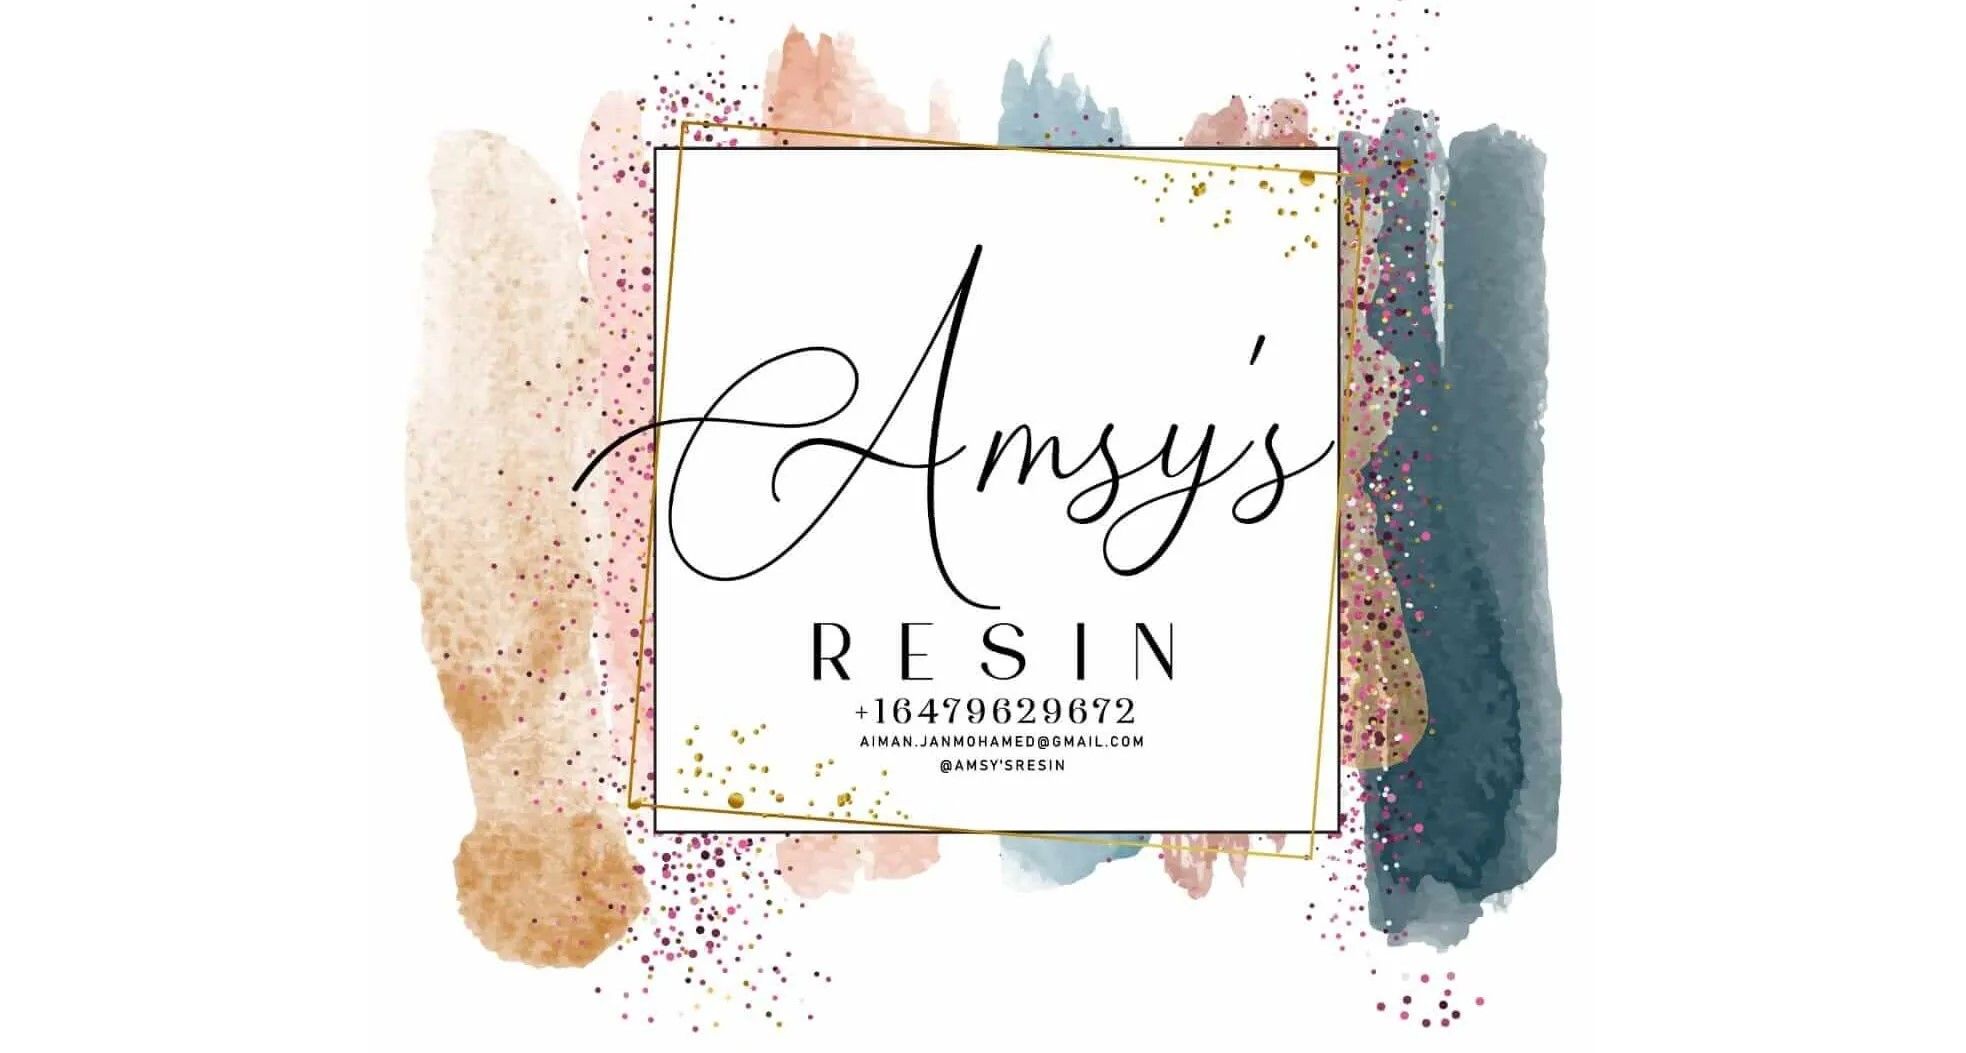 Resin Decor and Everything With Resin! - Aiman Kanji